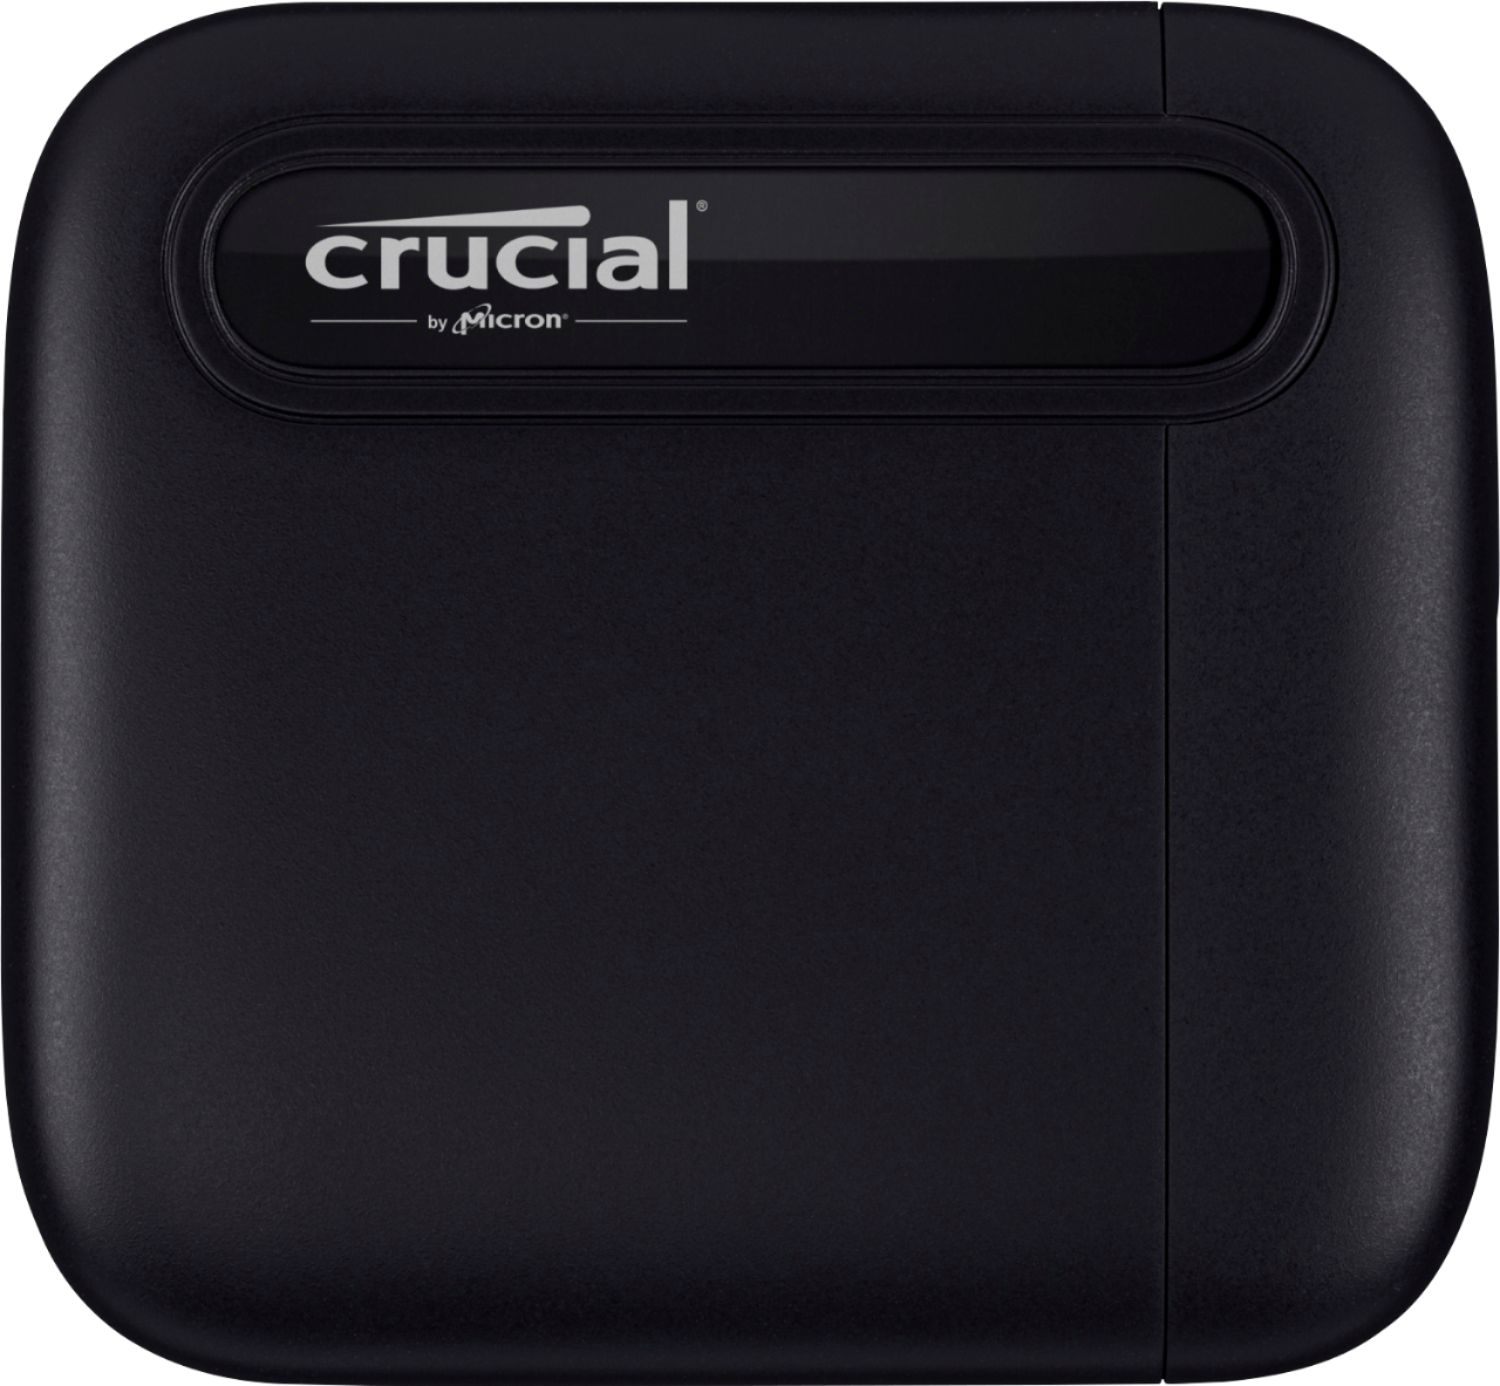 Crucial X6 Portable SSD Review - 2TB Model Tested - Legit Reviews